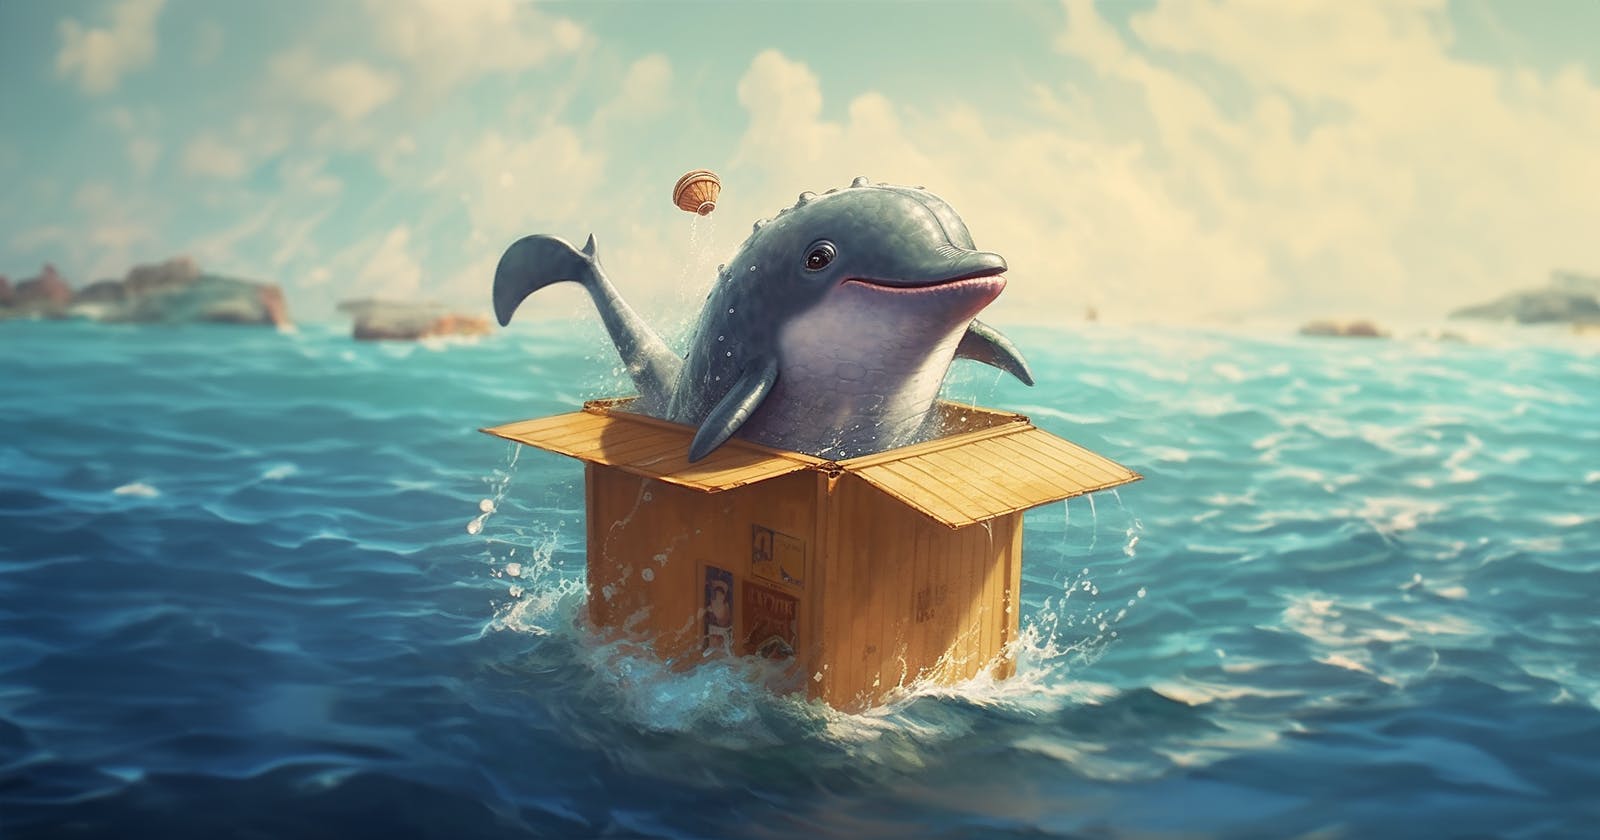 🐳 6 Top Websites to Learn About Docker and Containerisation